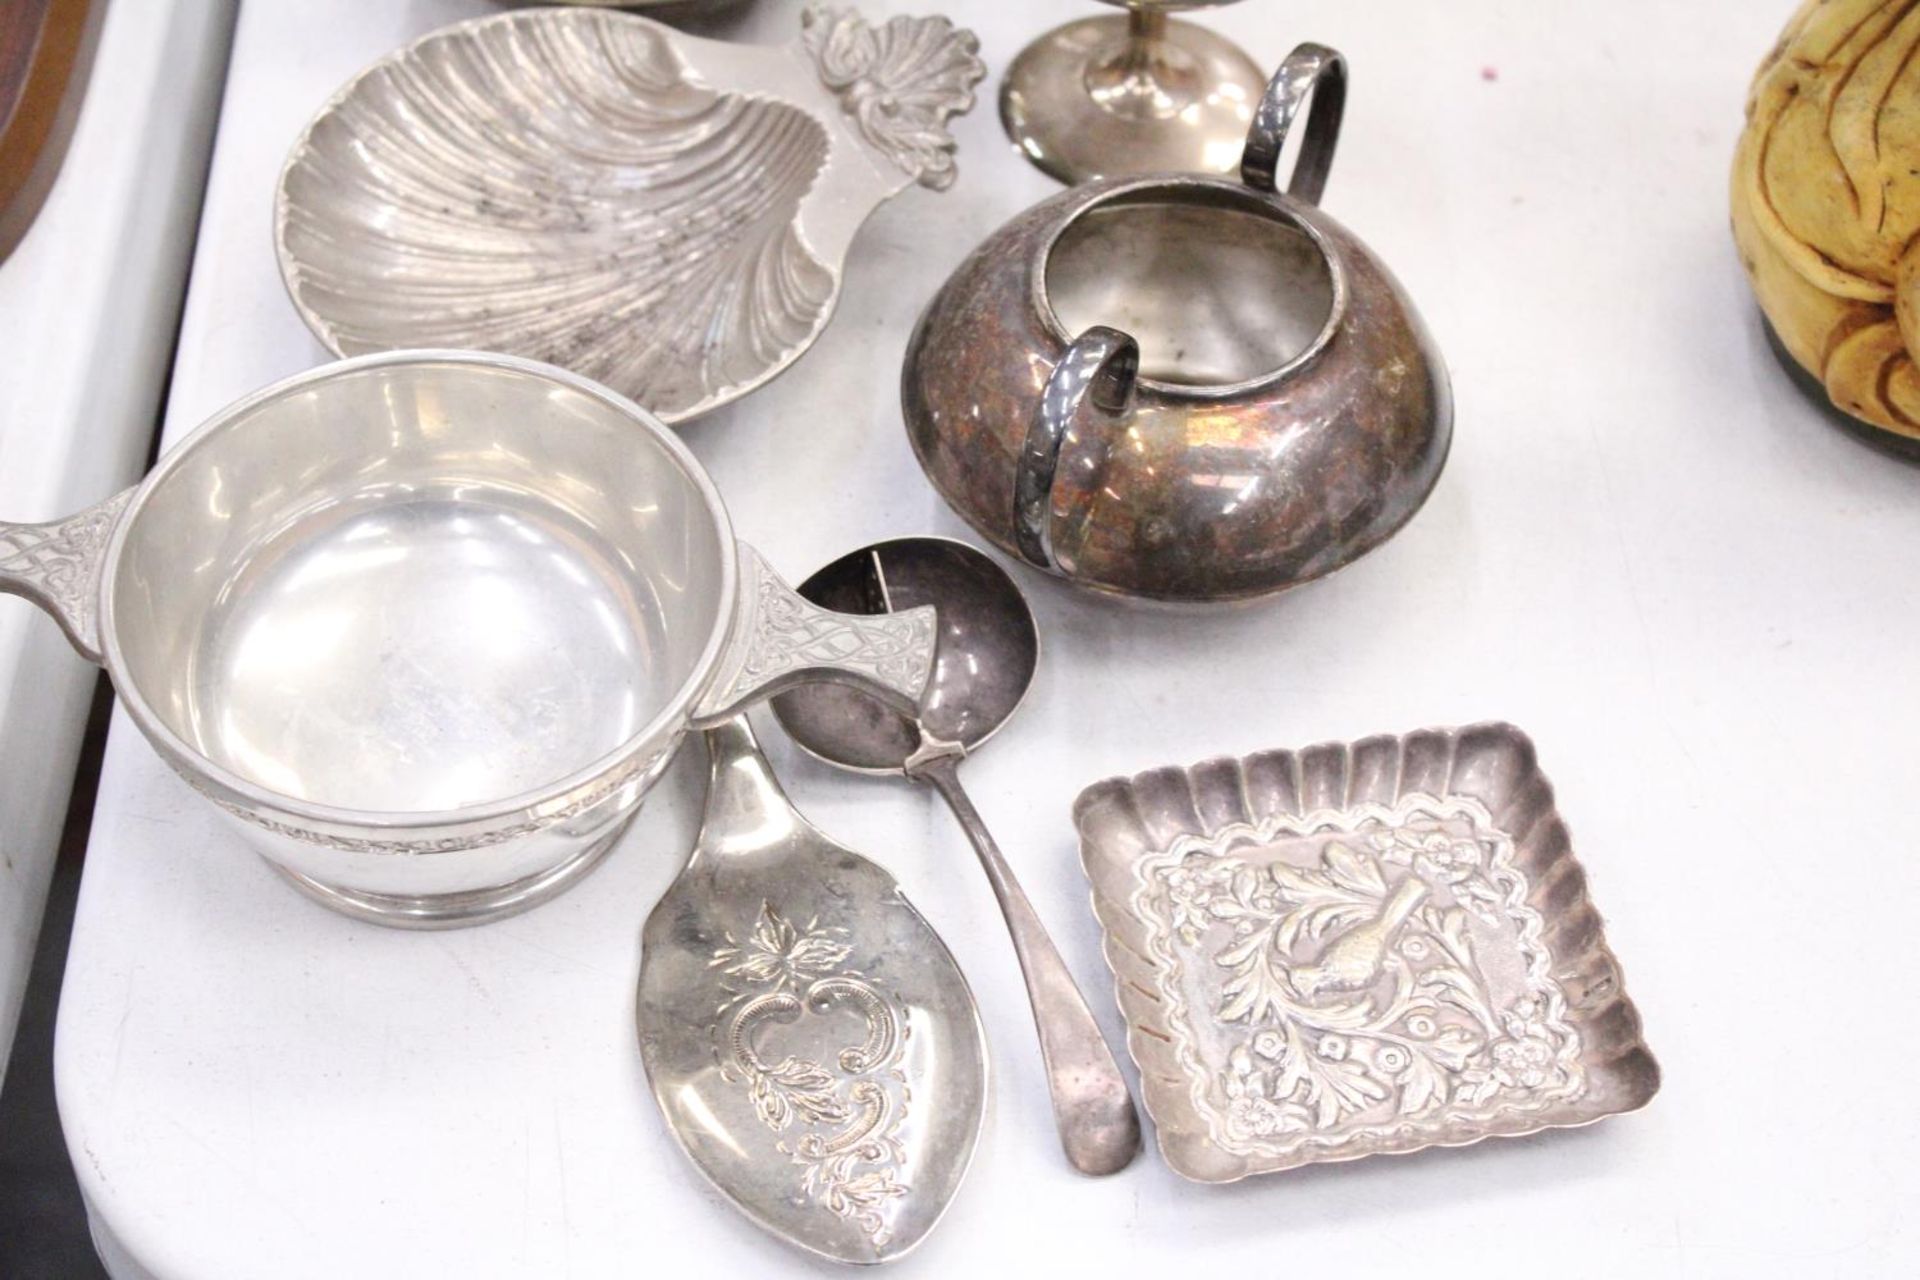 A LARGE QUANTITY OF SILVER PLATED ITEMS TO INCLUDE CANDLESTICKS, A KETTLE, A TANKARD, JUGS, BOWLS, - Image 2 of 6